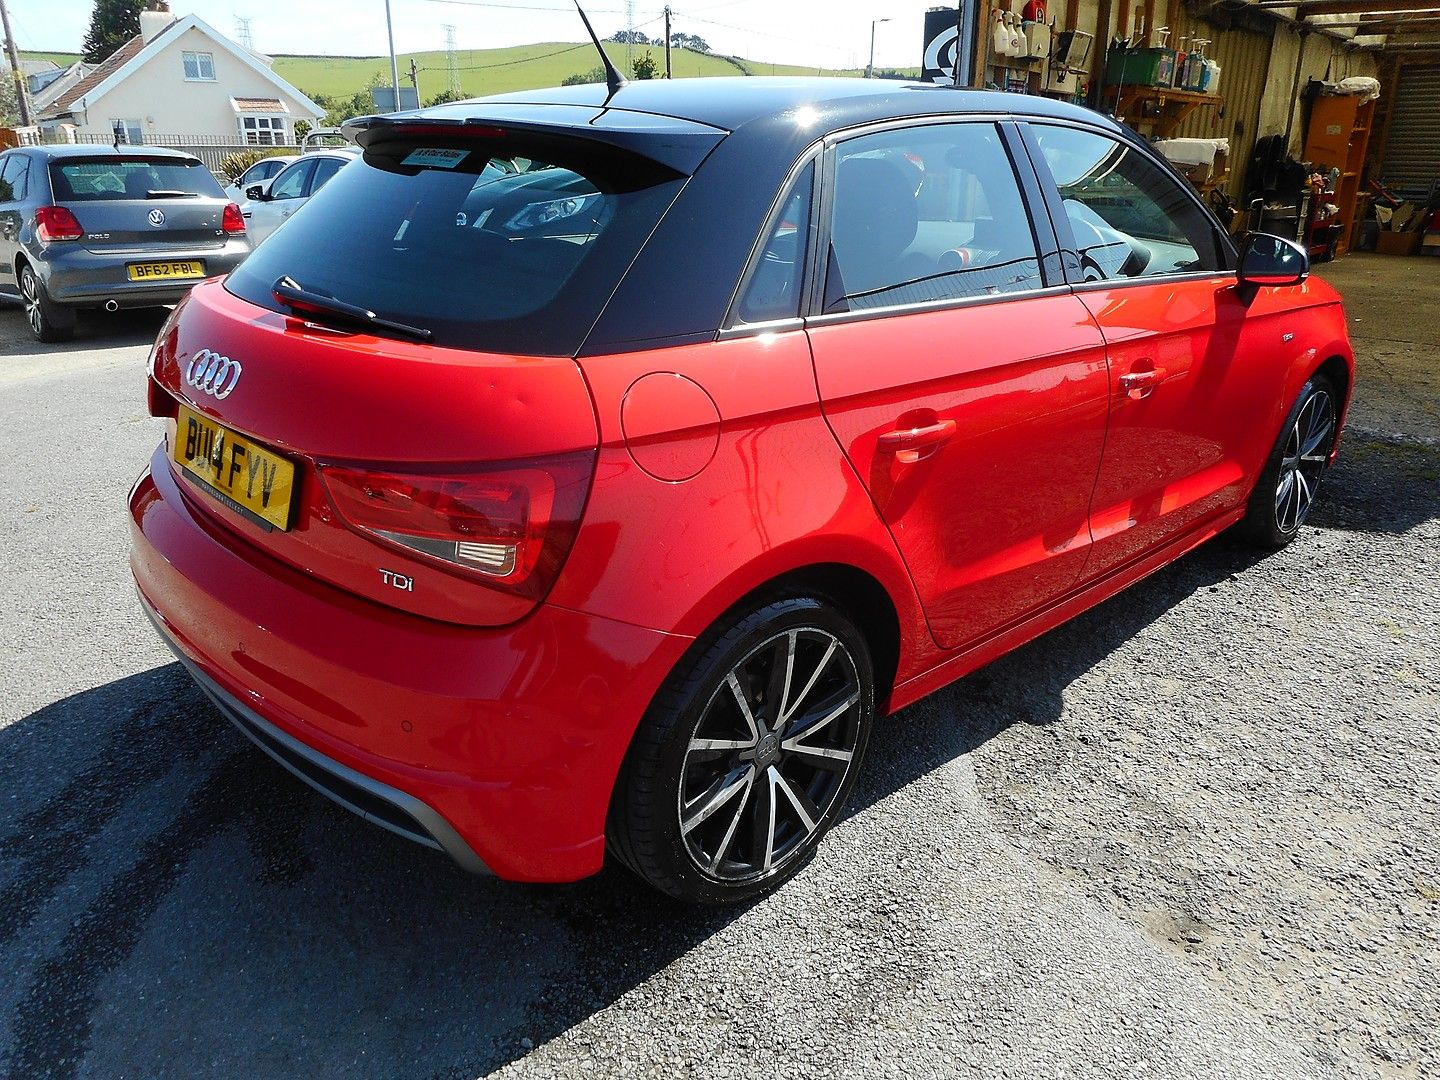 AUDI A1 Sportback 1.6 TDI S line Style Edition 105PS (2014) - Picture 3